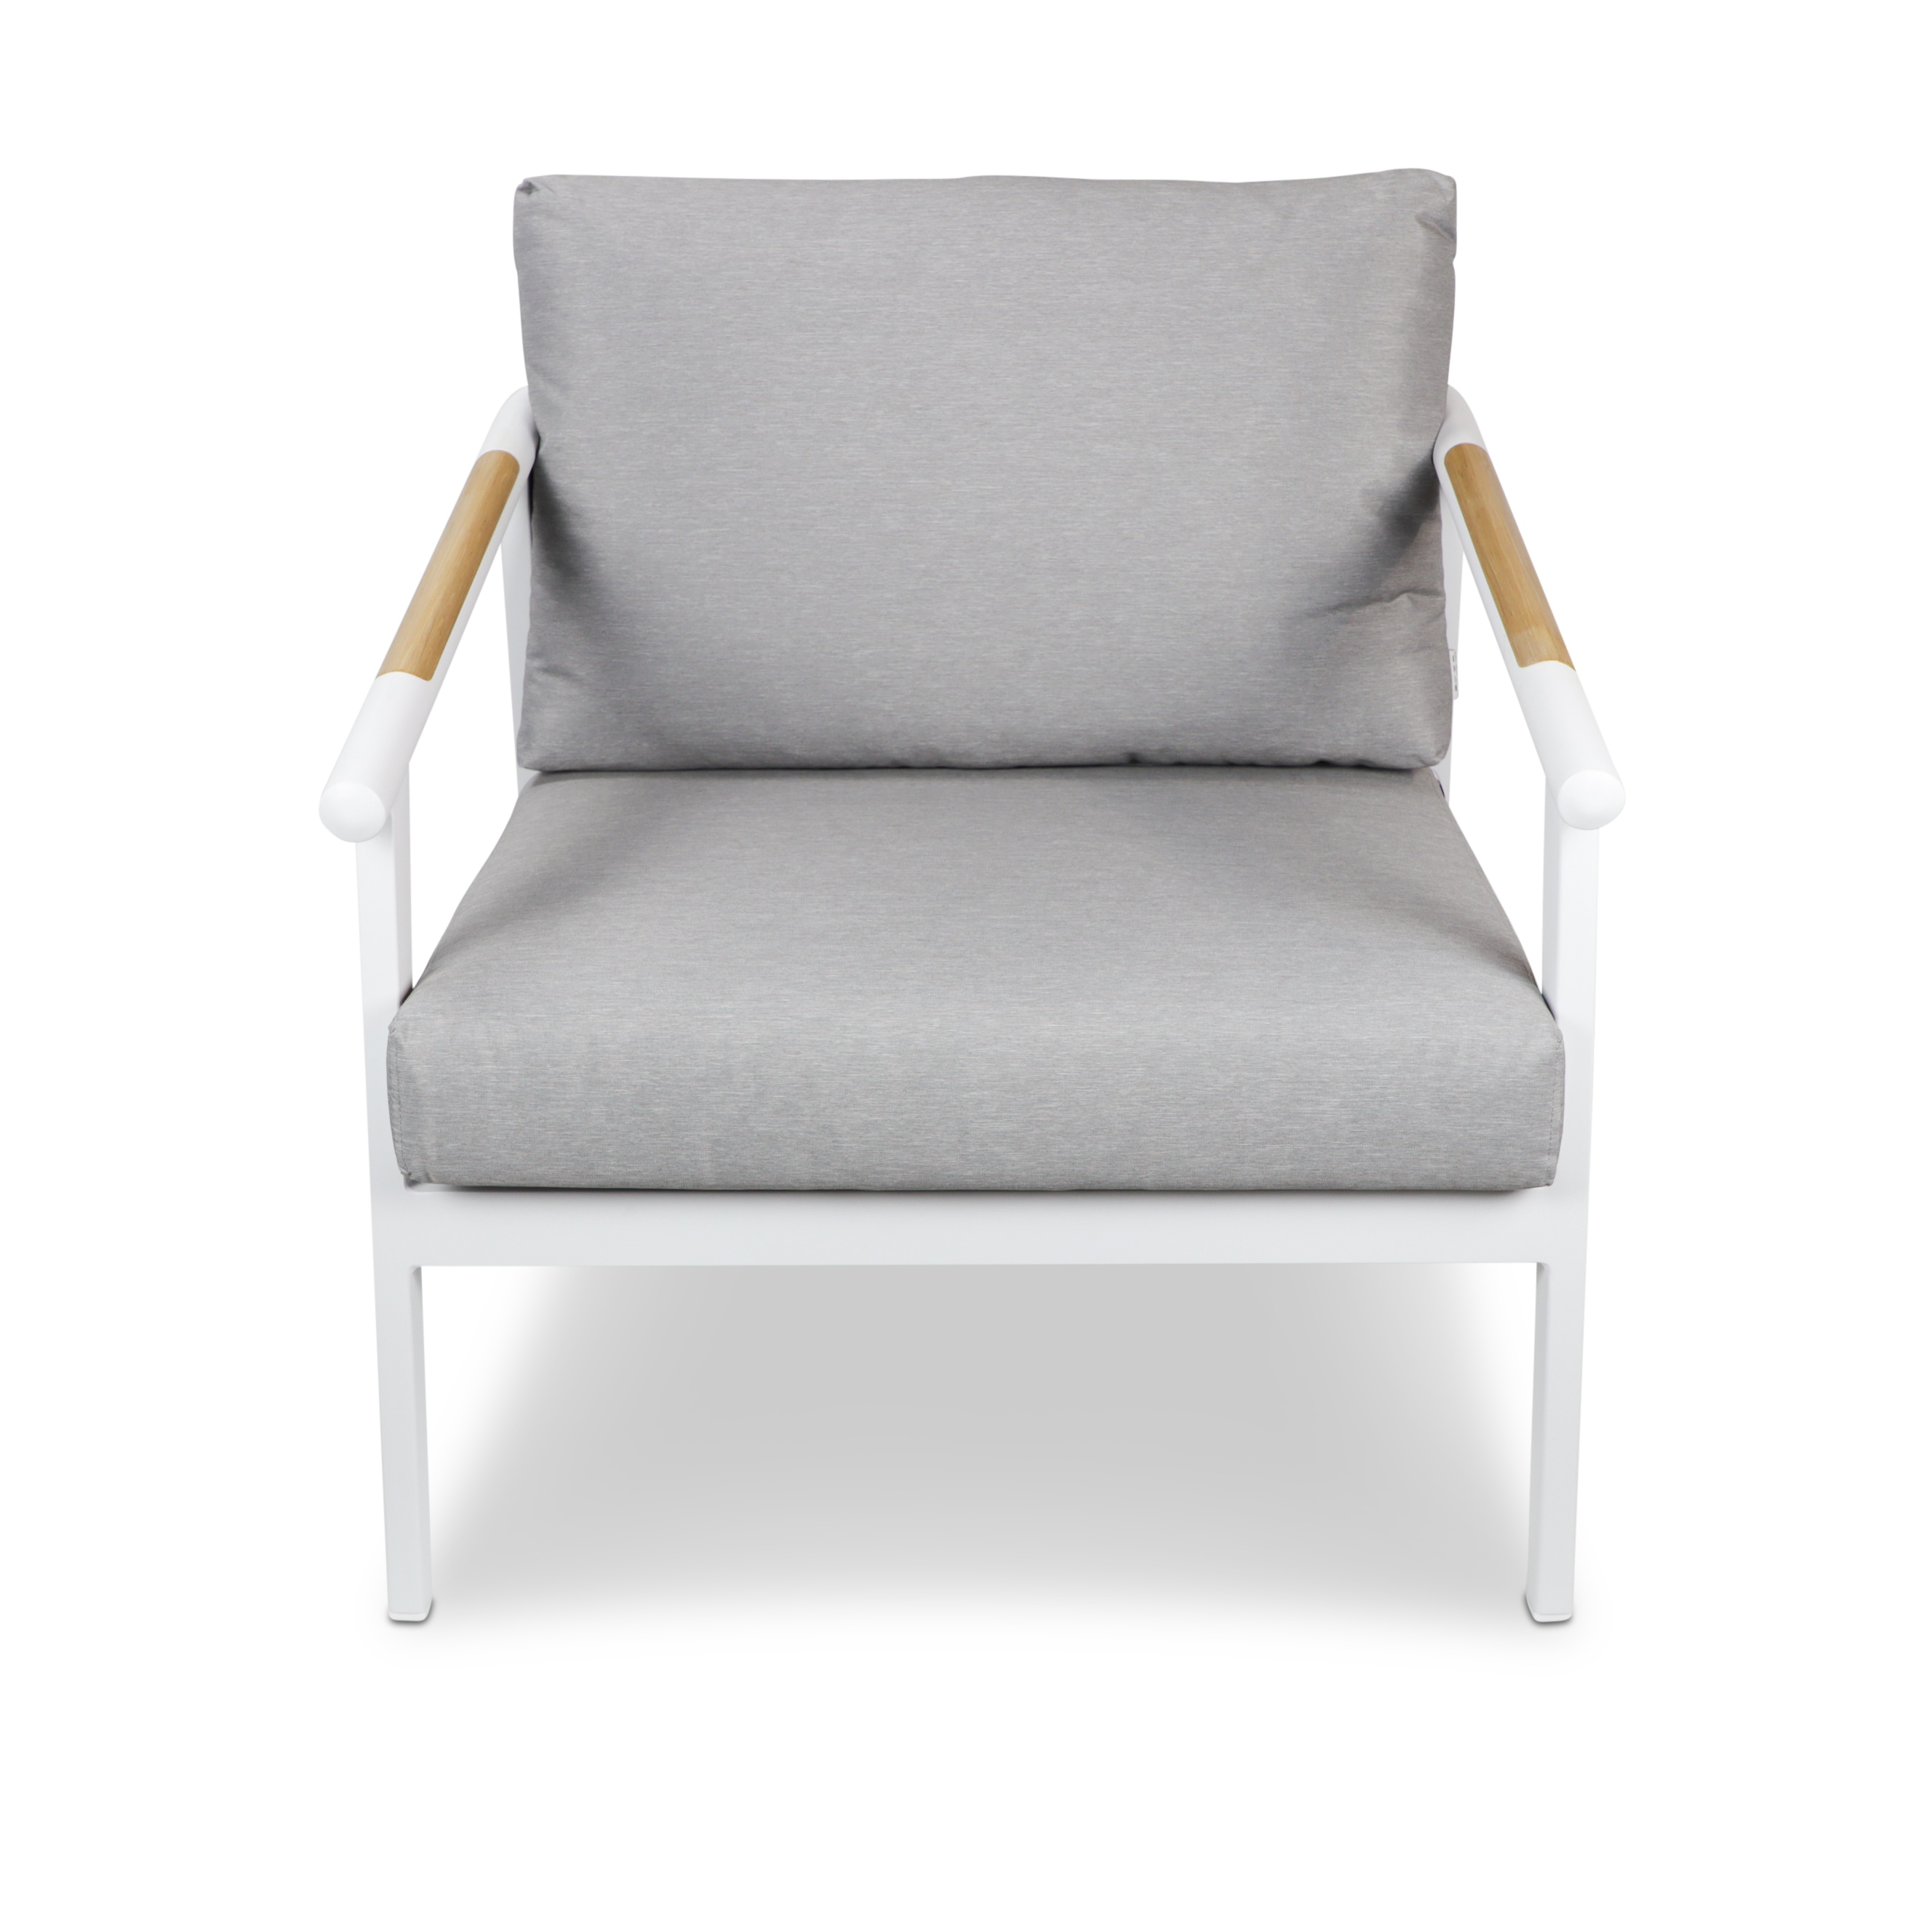 Porto 3 Seater with 2 x Armchair in Arctic White with Teak Polywood Accent and Spuncrylic Stone Grey Cushions